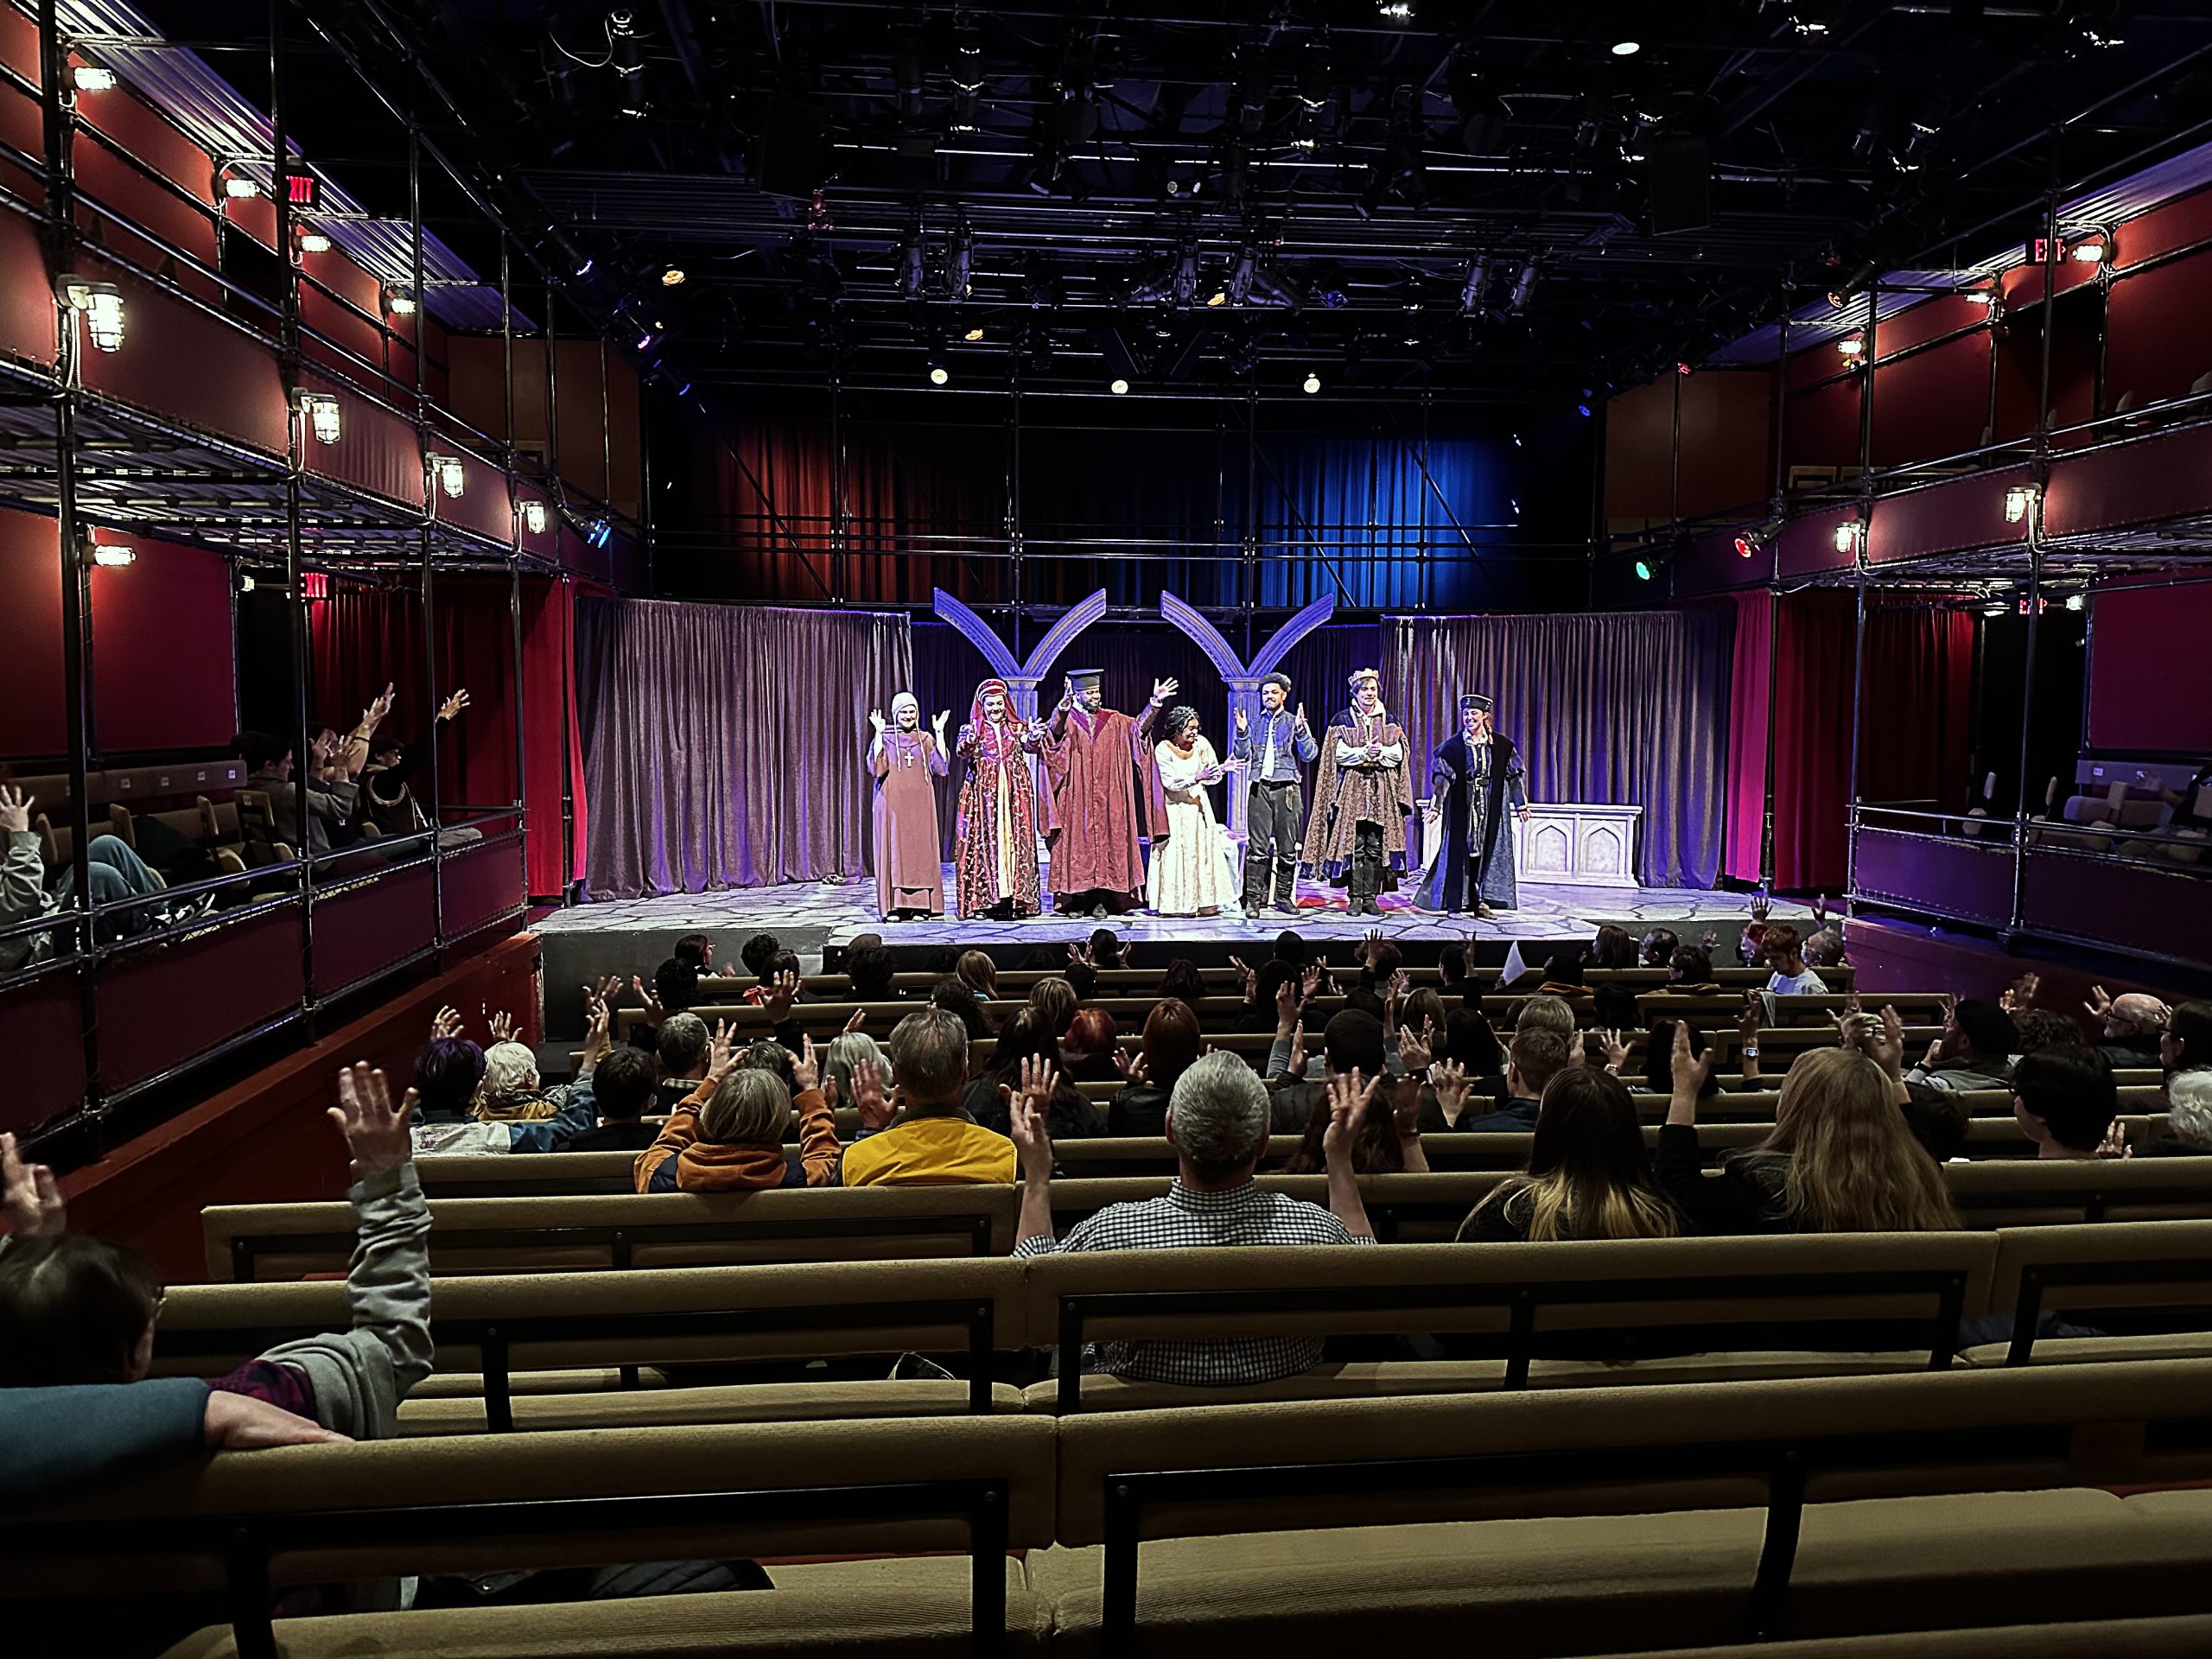 a photo of an audience n a theater, taken from the back of the house, which shows them clapping in a sesnory-friendly style with their hands in the air.